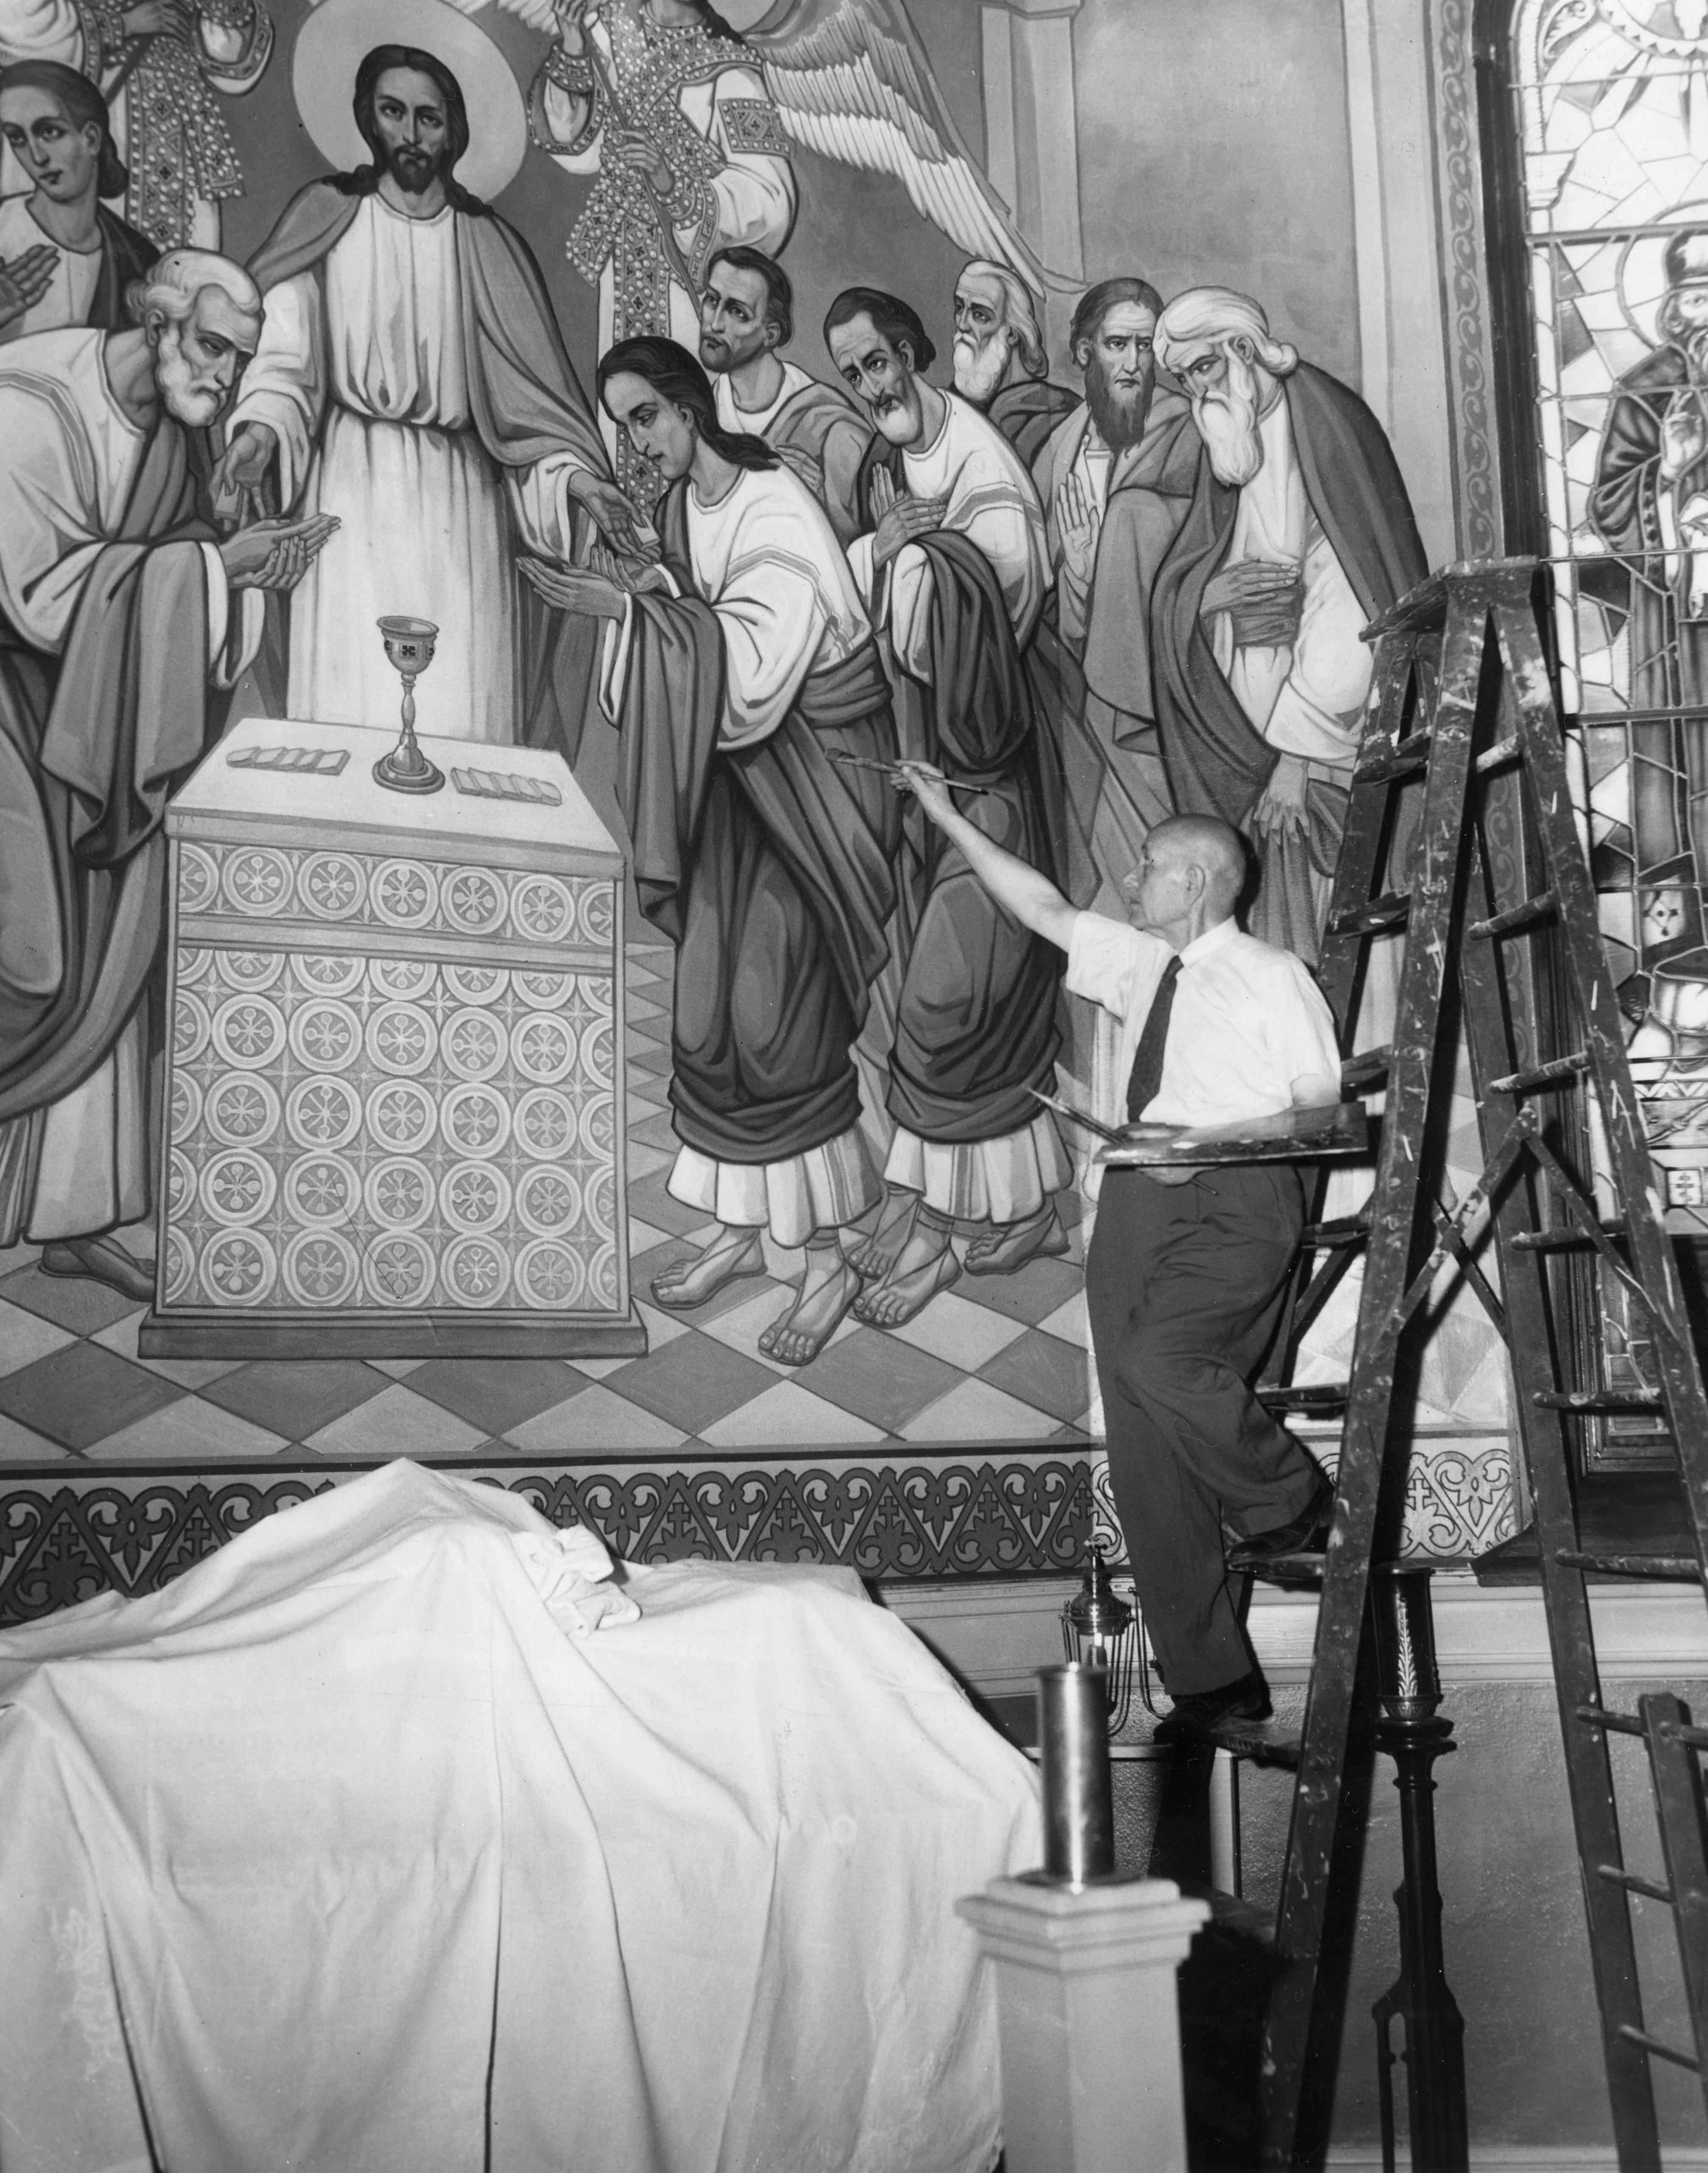 Russian émigré artist Andrei Bicenko puts the finishing touches on the altar fresco at St. Theodosius, 1954.  